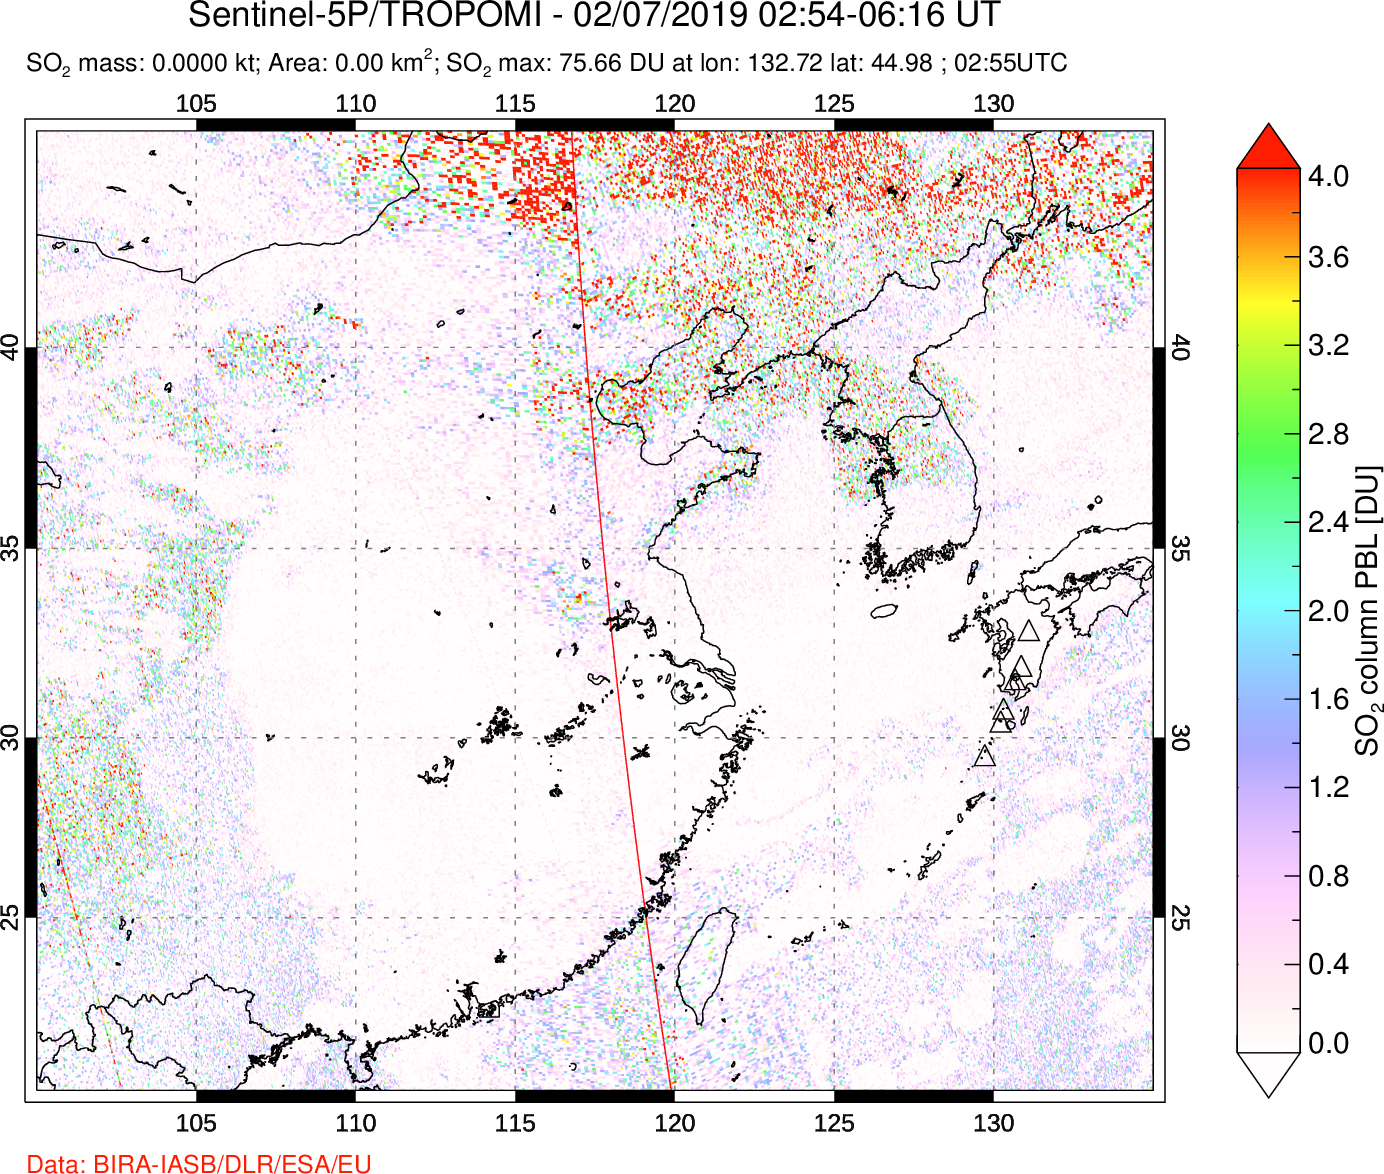 A sulfur dioxide image over Eastern China on Feb 07, 2019.